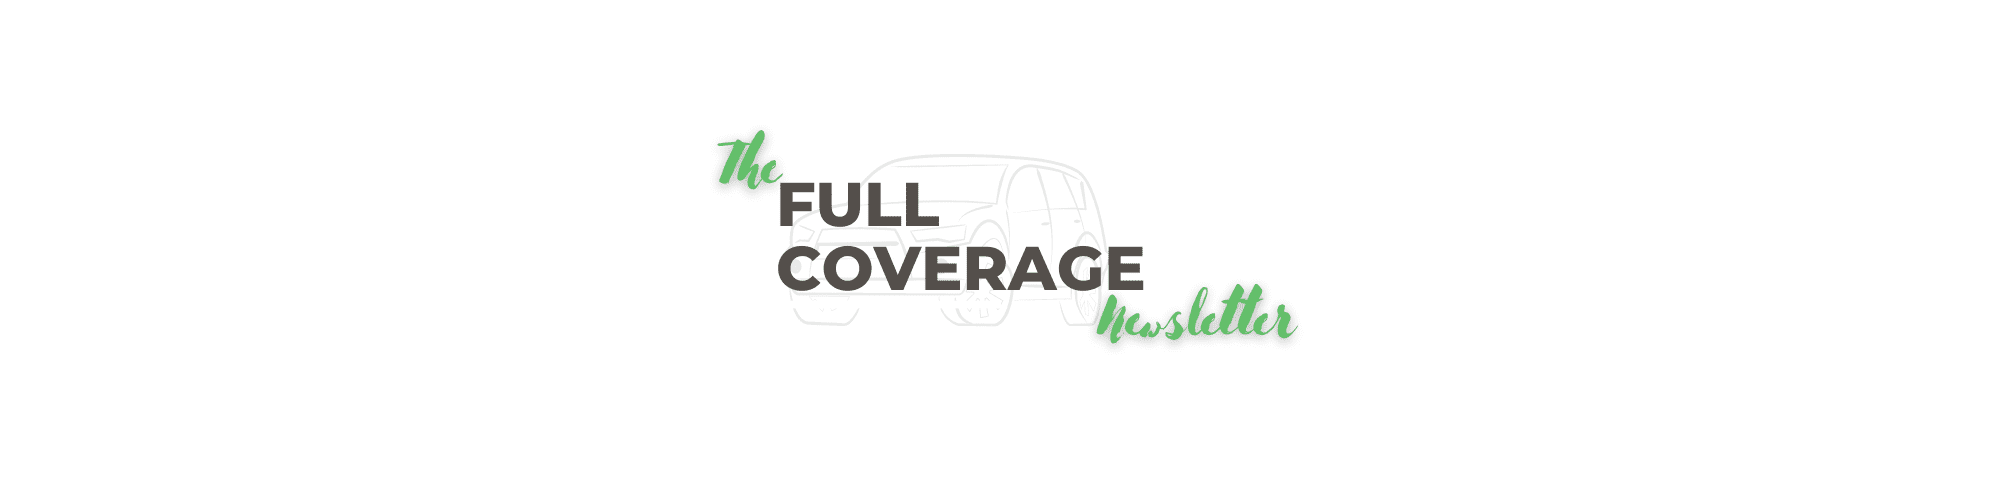 Welcome to the Full Coverage Newsletter!